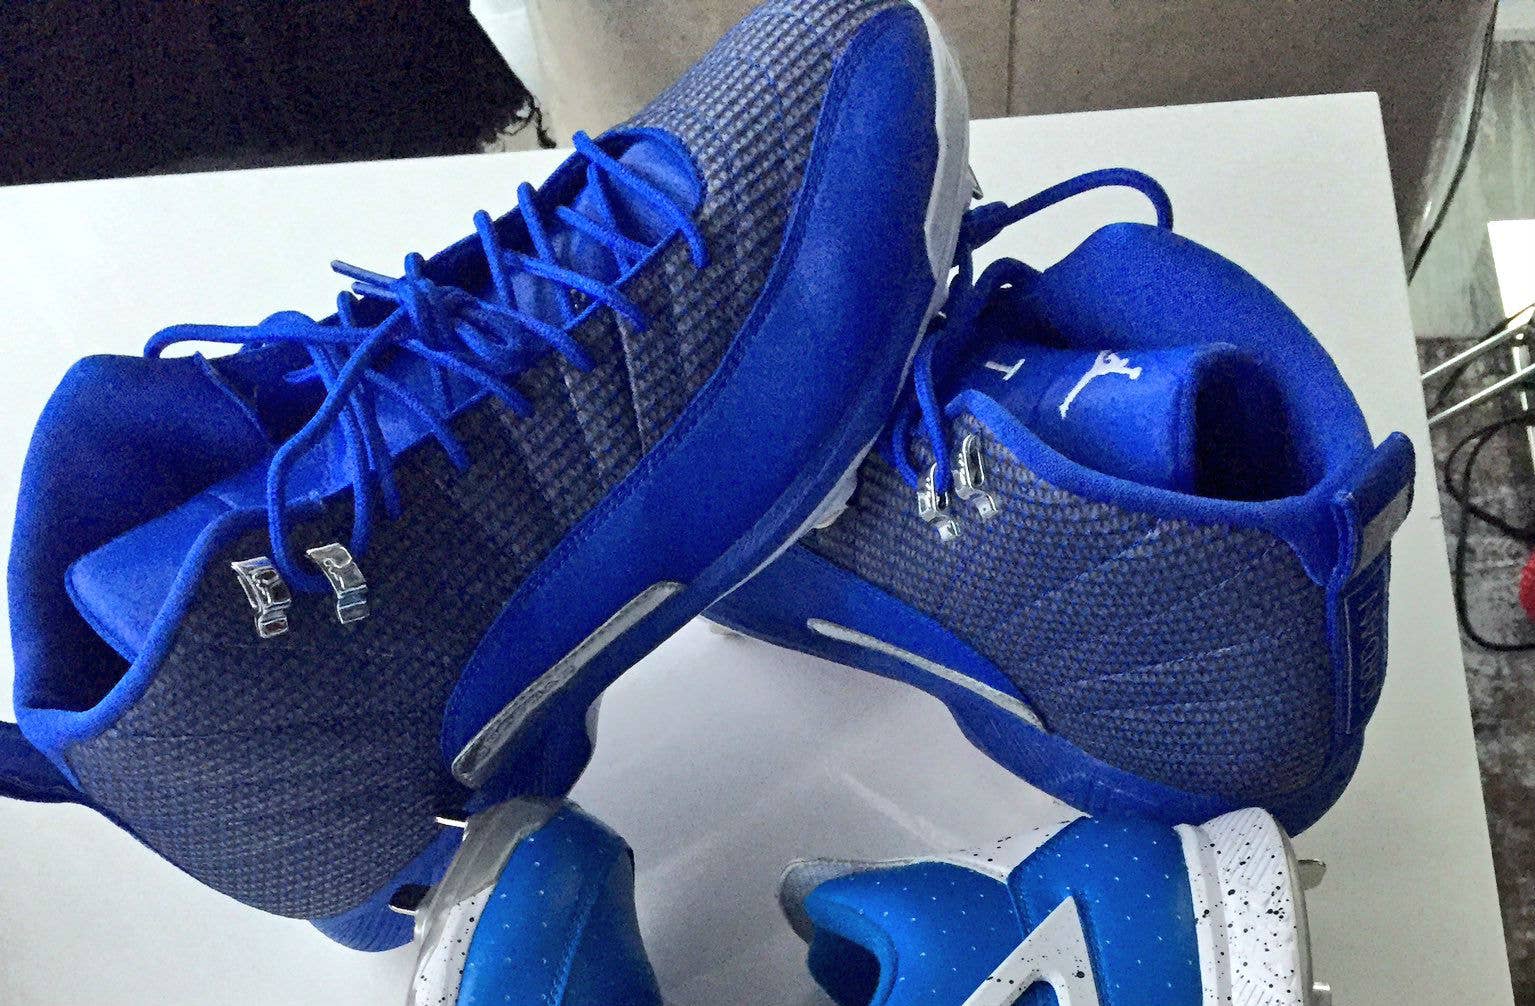 NY Mets: Marcus Stroman cleats design, and what they mean